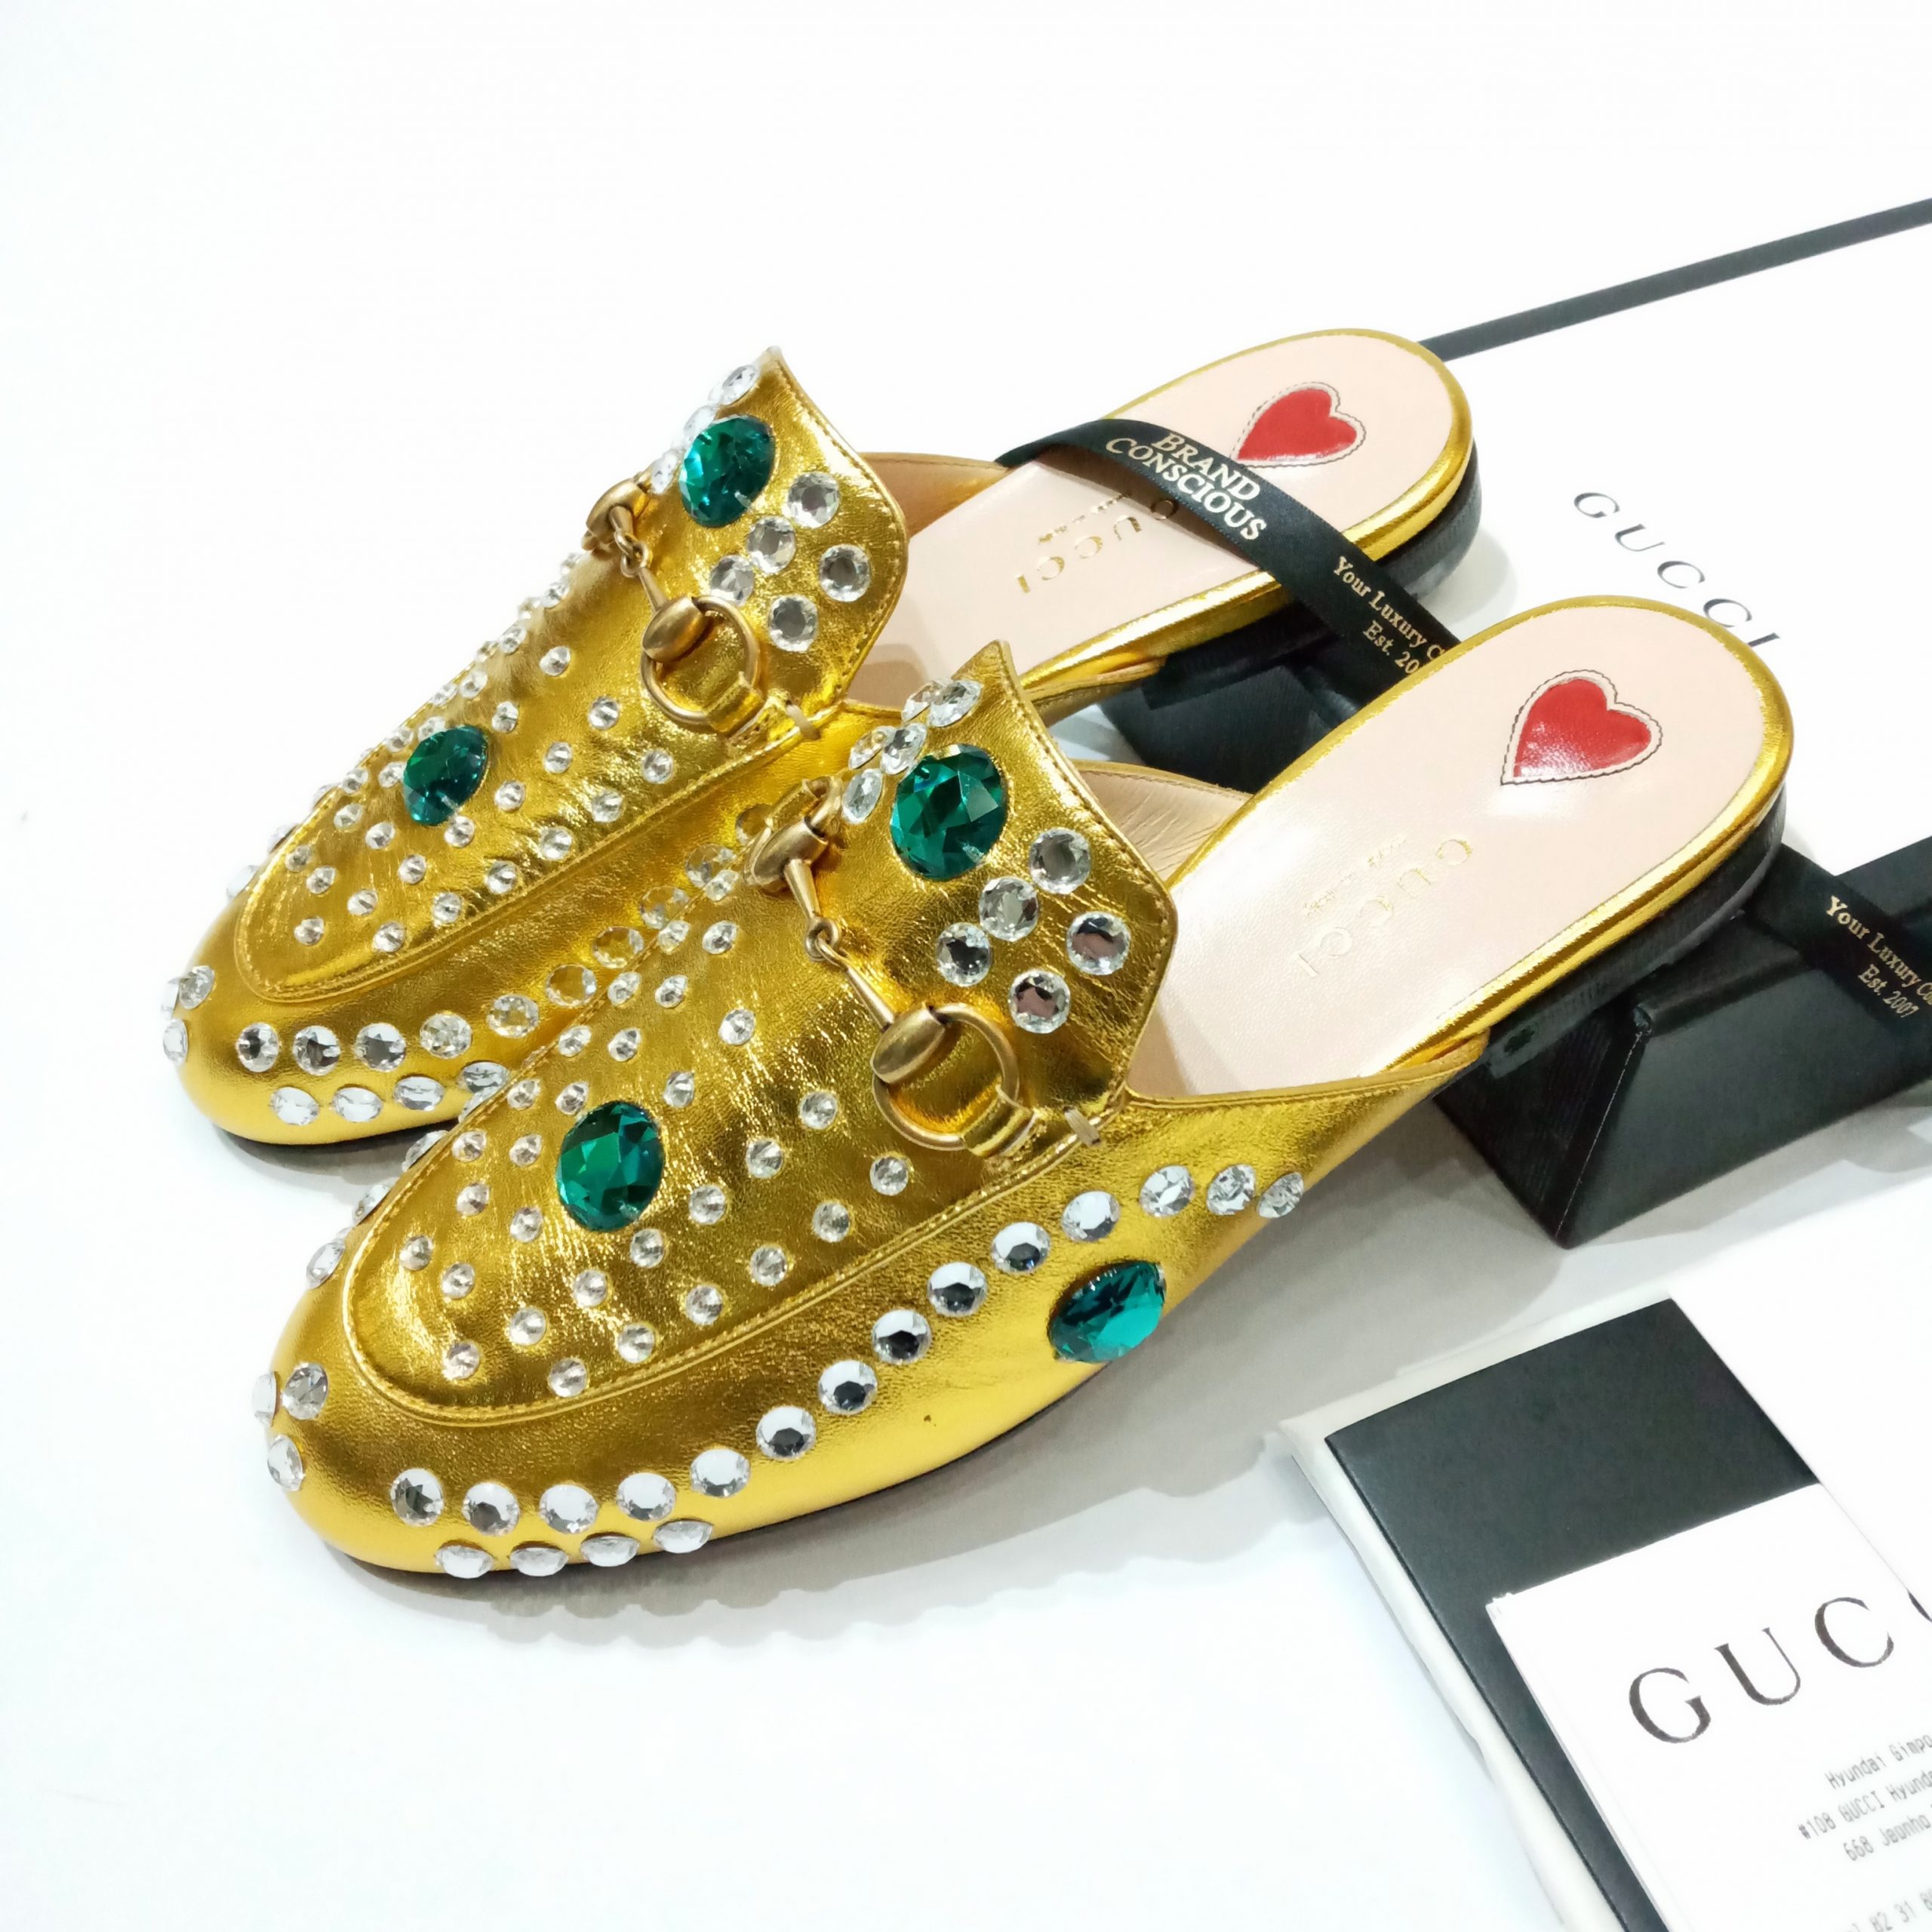 Gucci Princetown Mule Crystal Embellished Metallic Gold size 36 -  BrandConscious Authentics